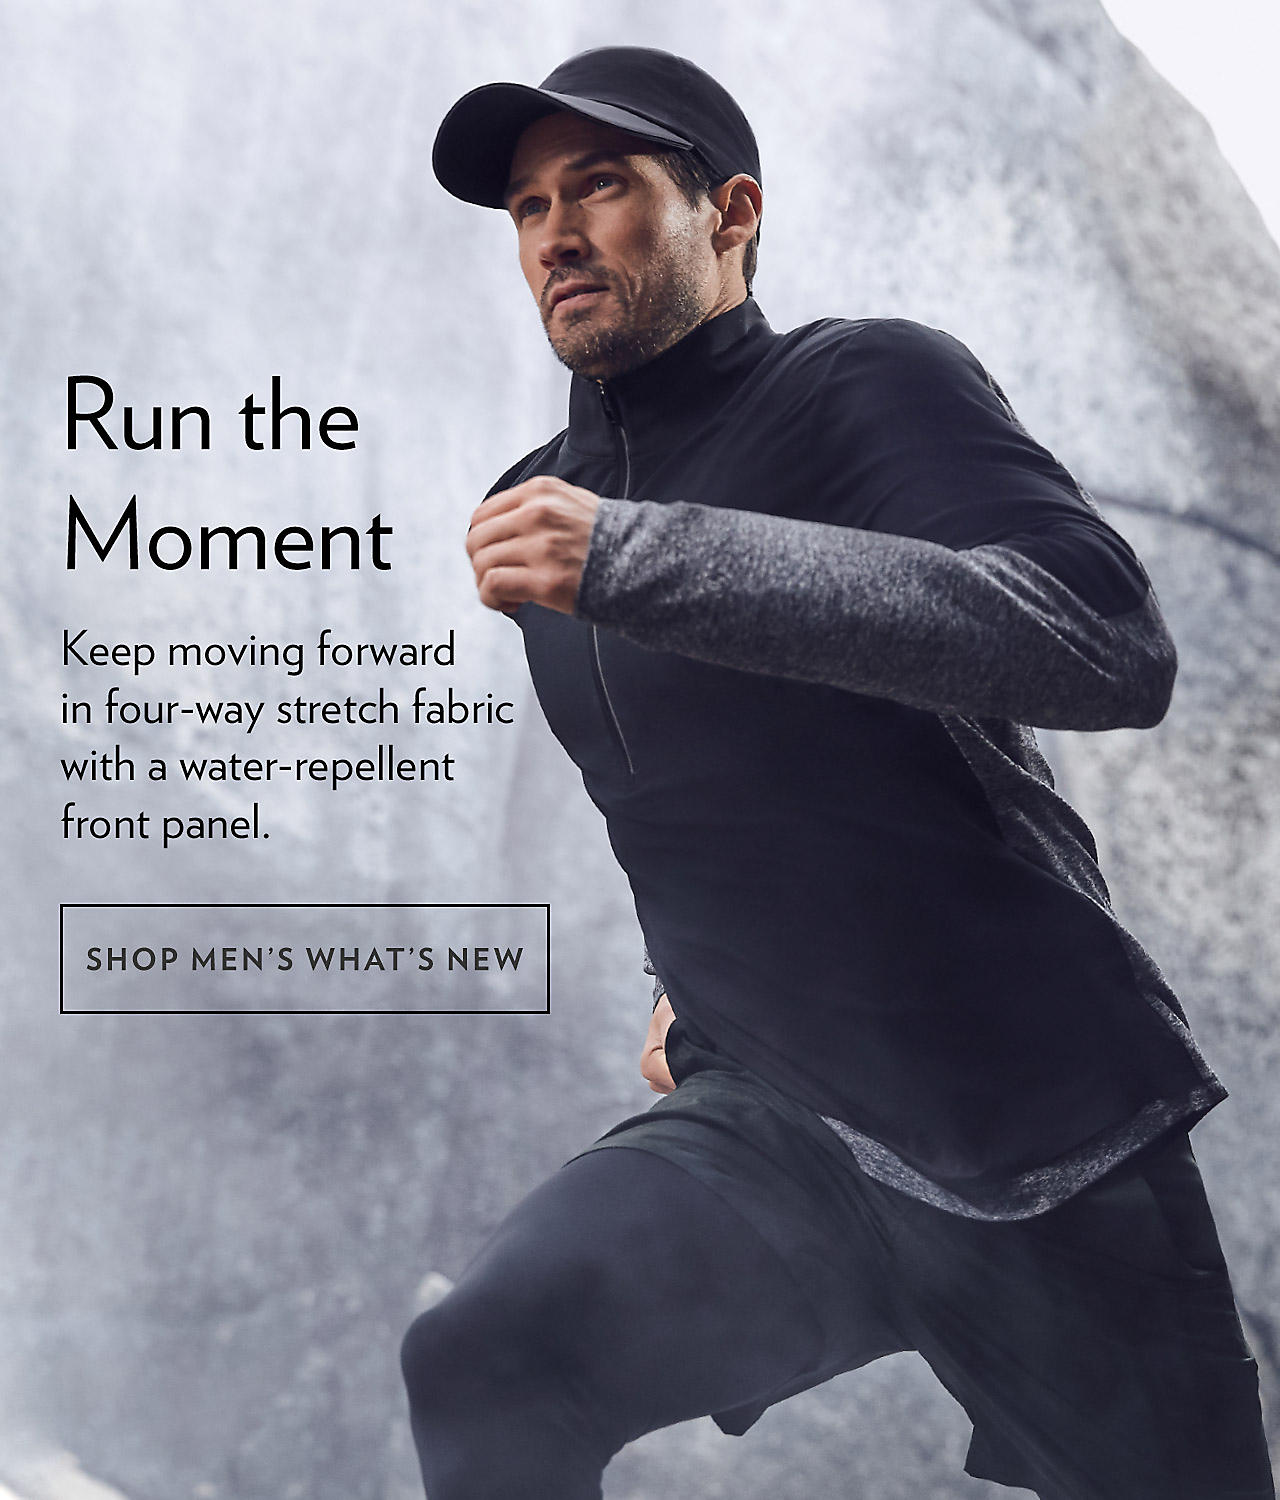 Run the Moment - SHOP MEN'S WHAT'S NEW